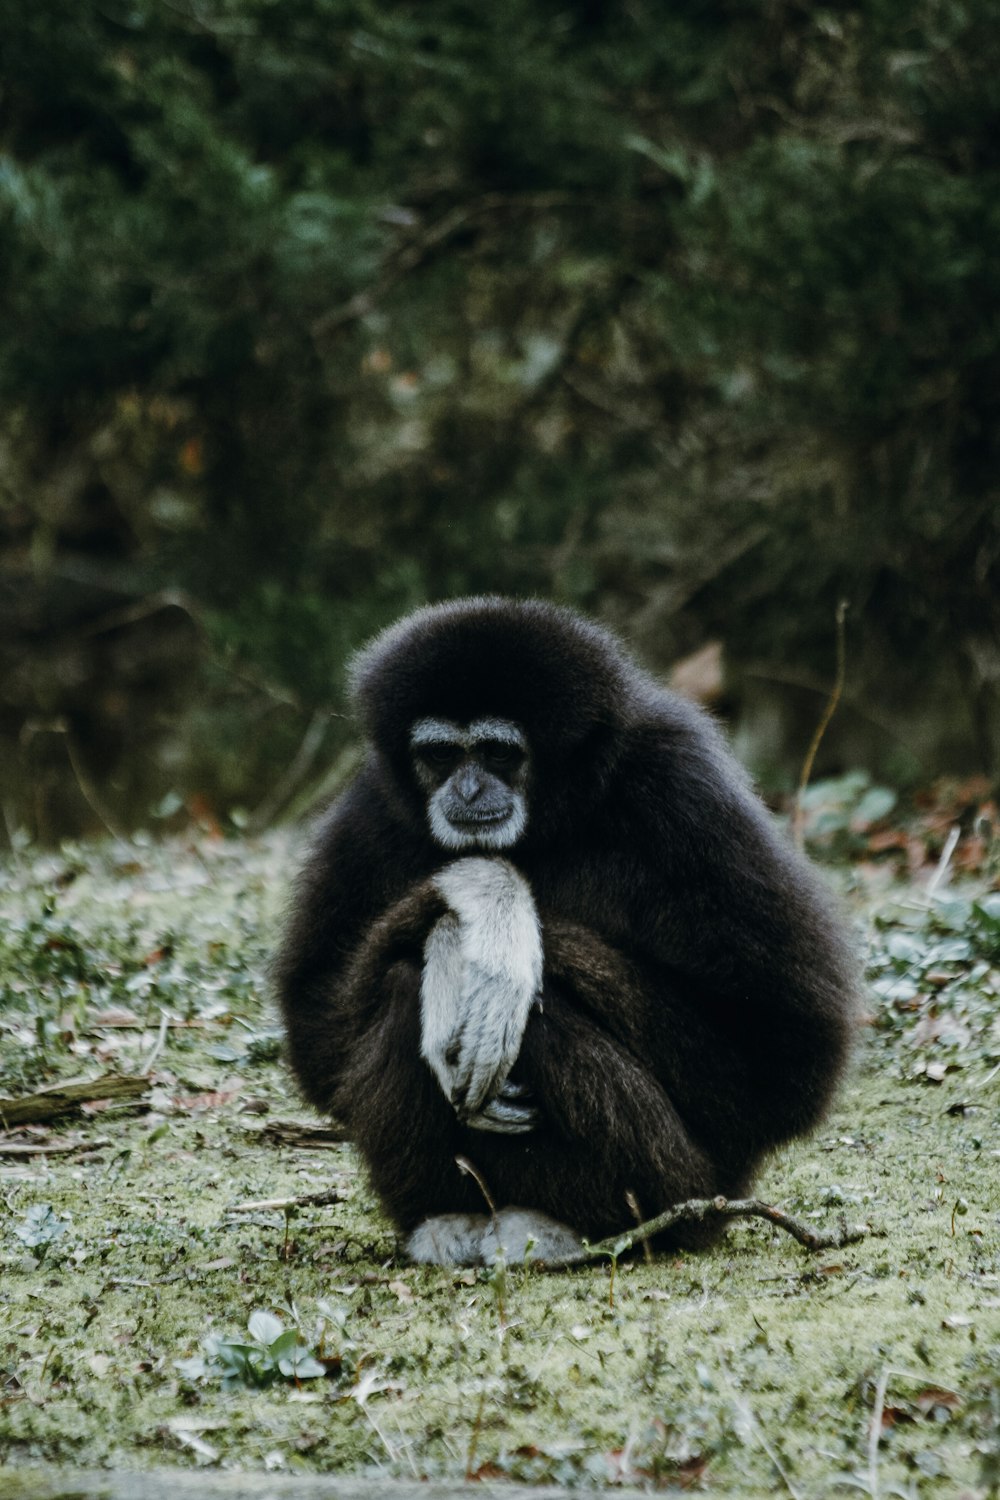 a black and white monkey sitting on the ground